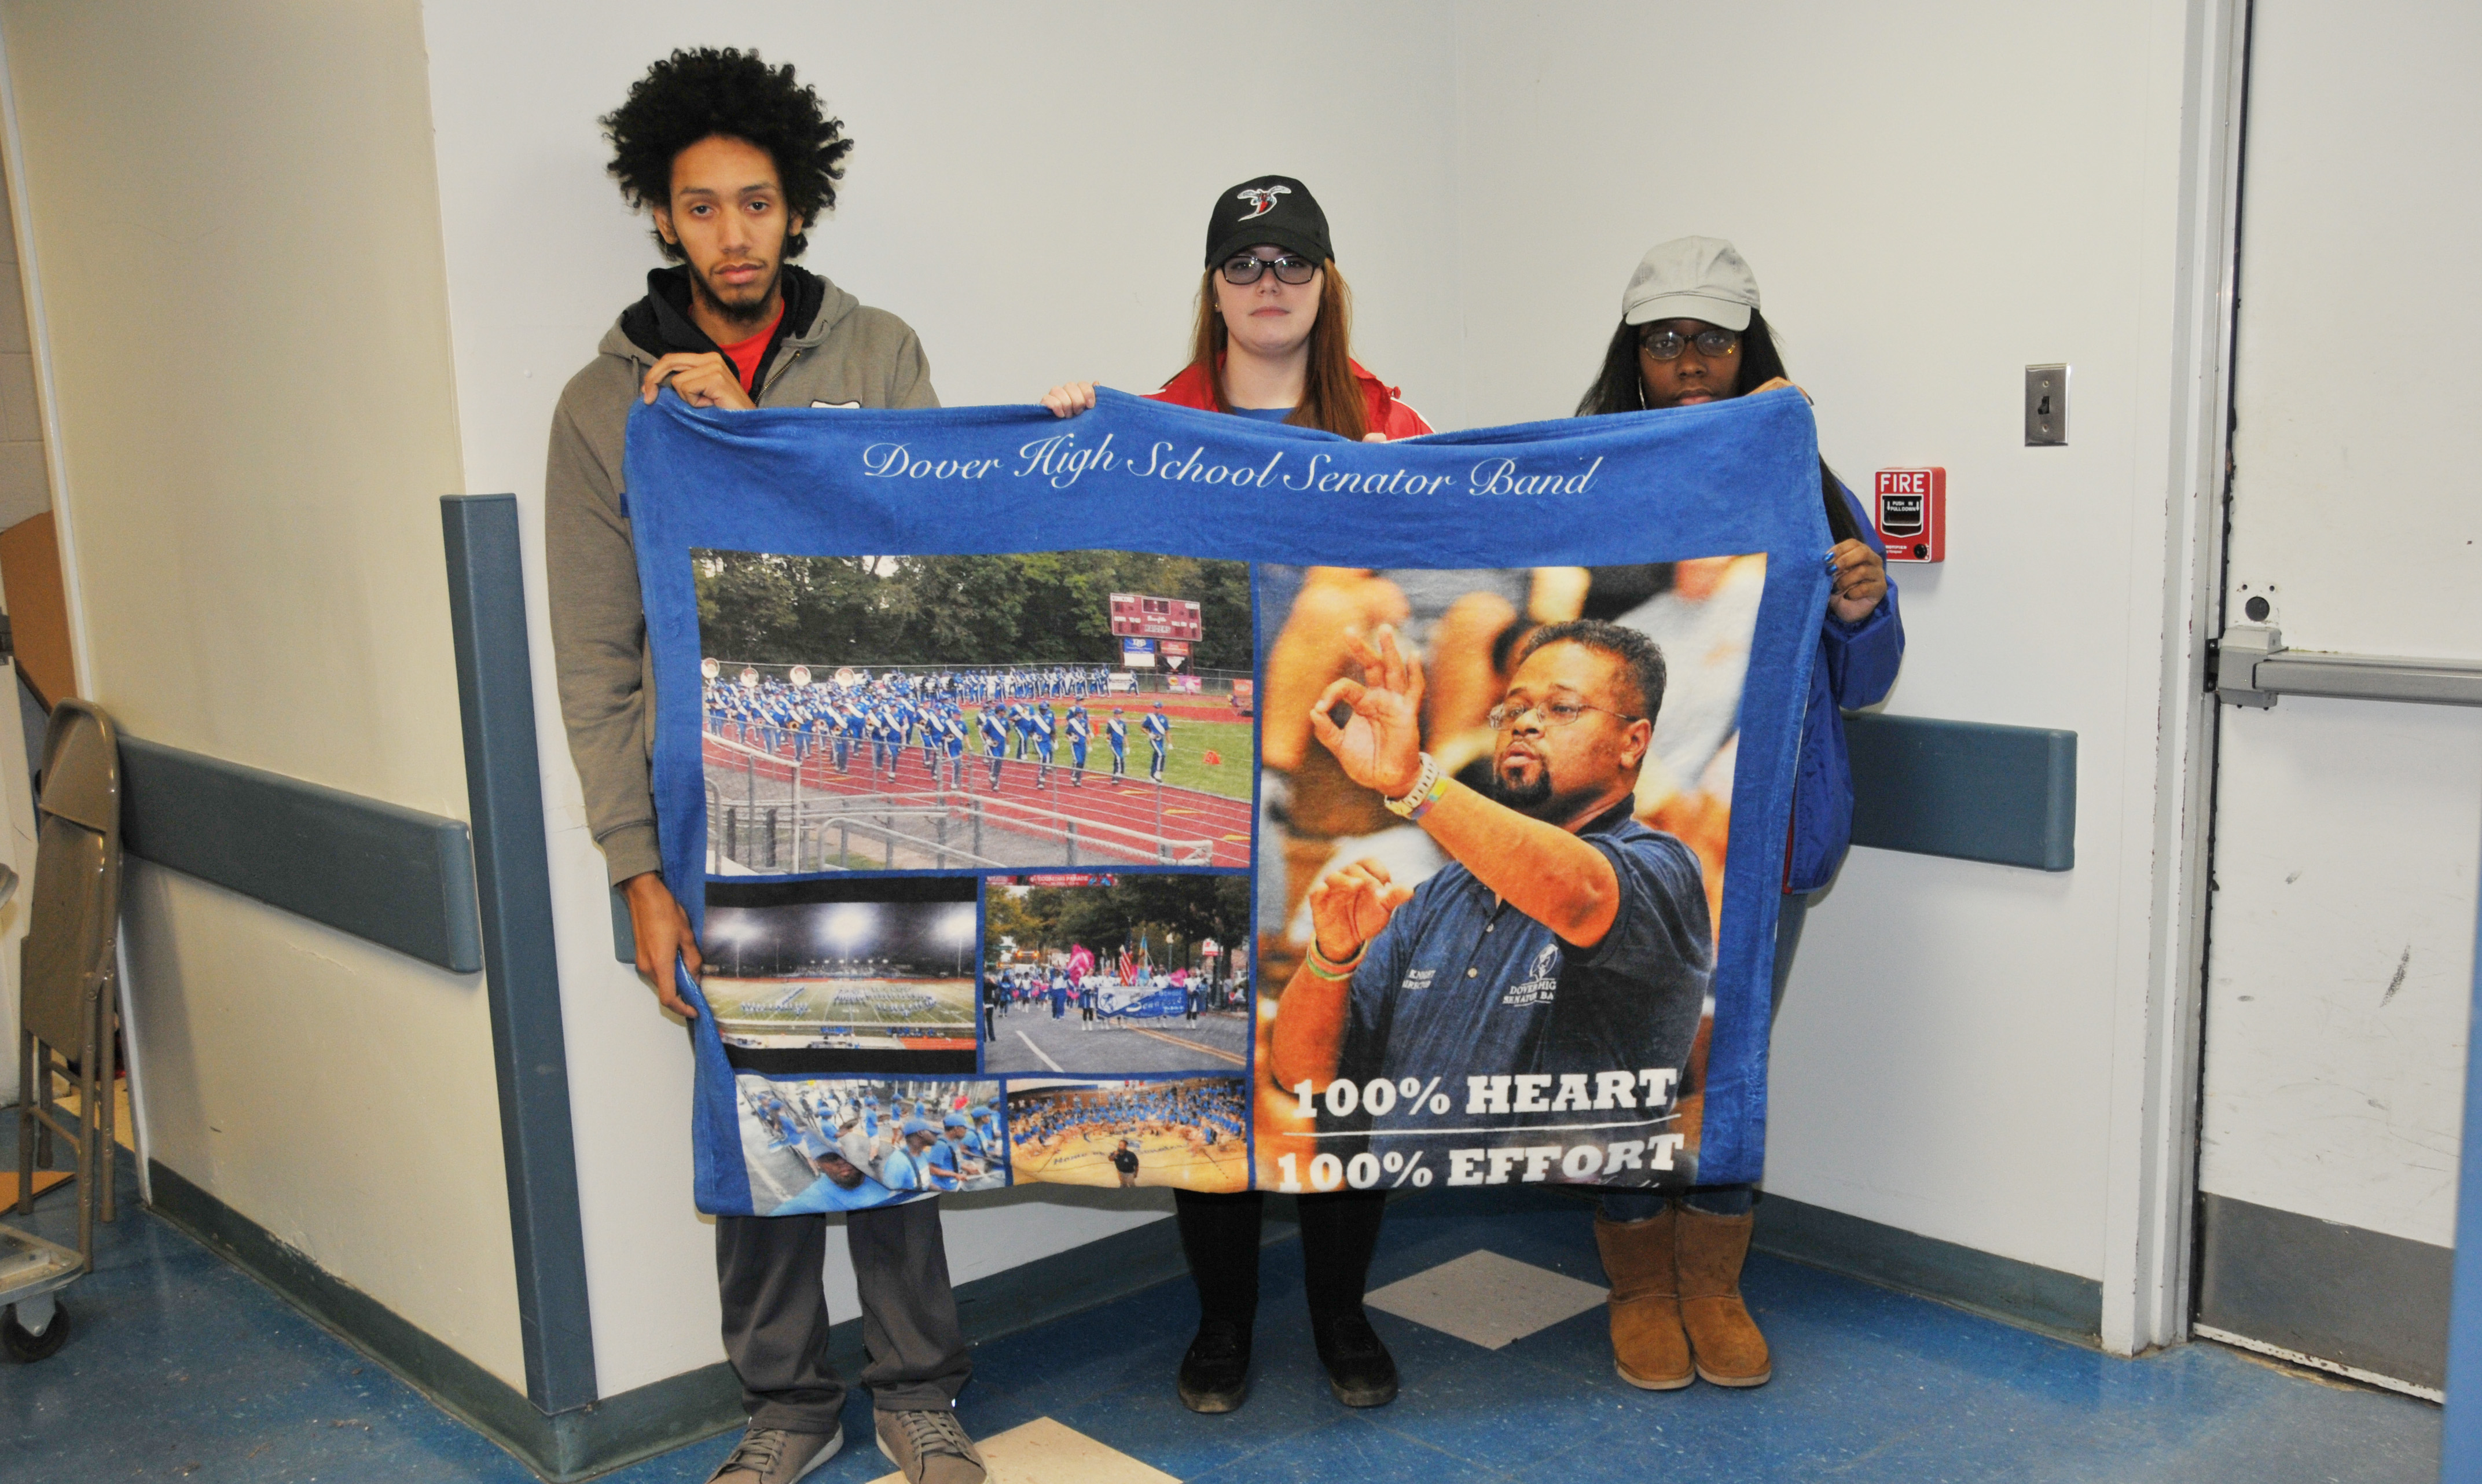 (L-r) Carlos Ortiz, Christina Trice and Akeya Rainer, former Dover HS Band members who were under Lenny Knight's director and then followed him to DSU, hold up a blanket of images that Dover HS presented to Mr. Knight at the end of his tenure there.